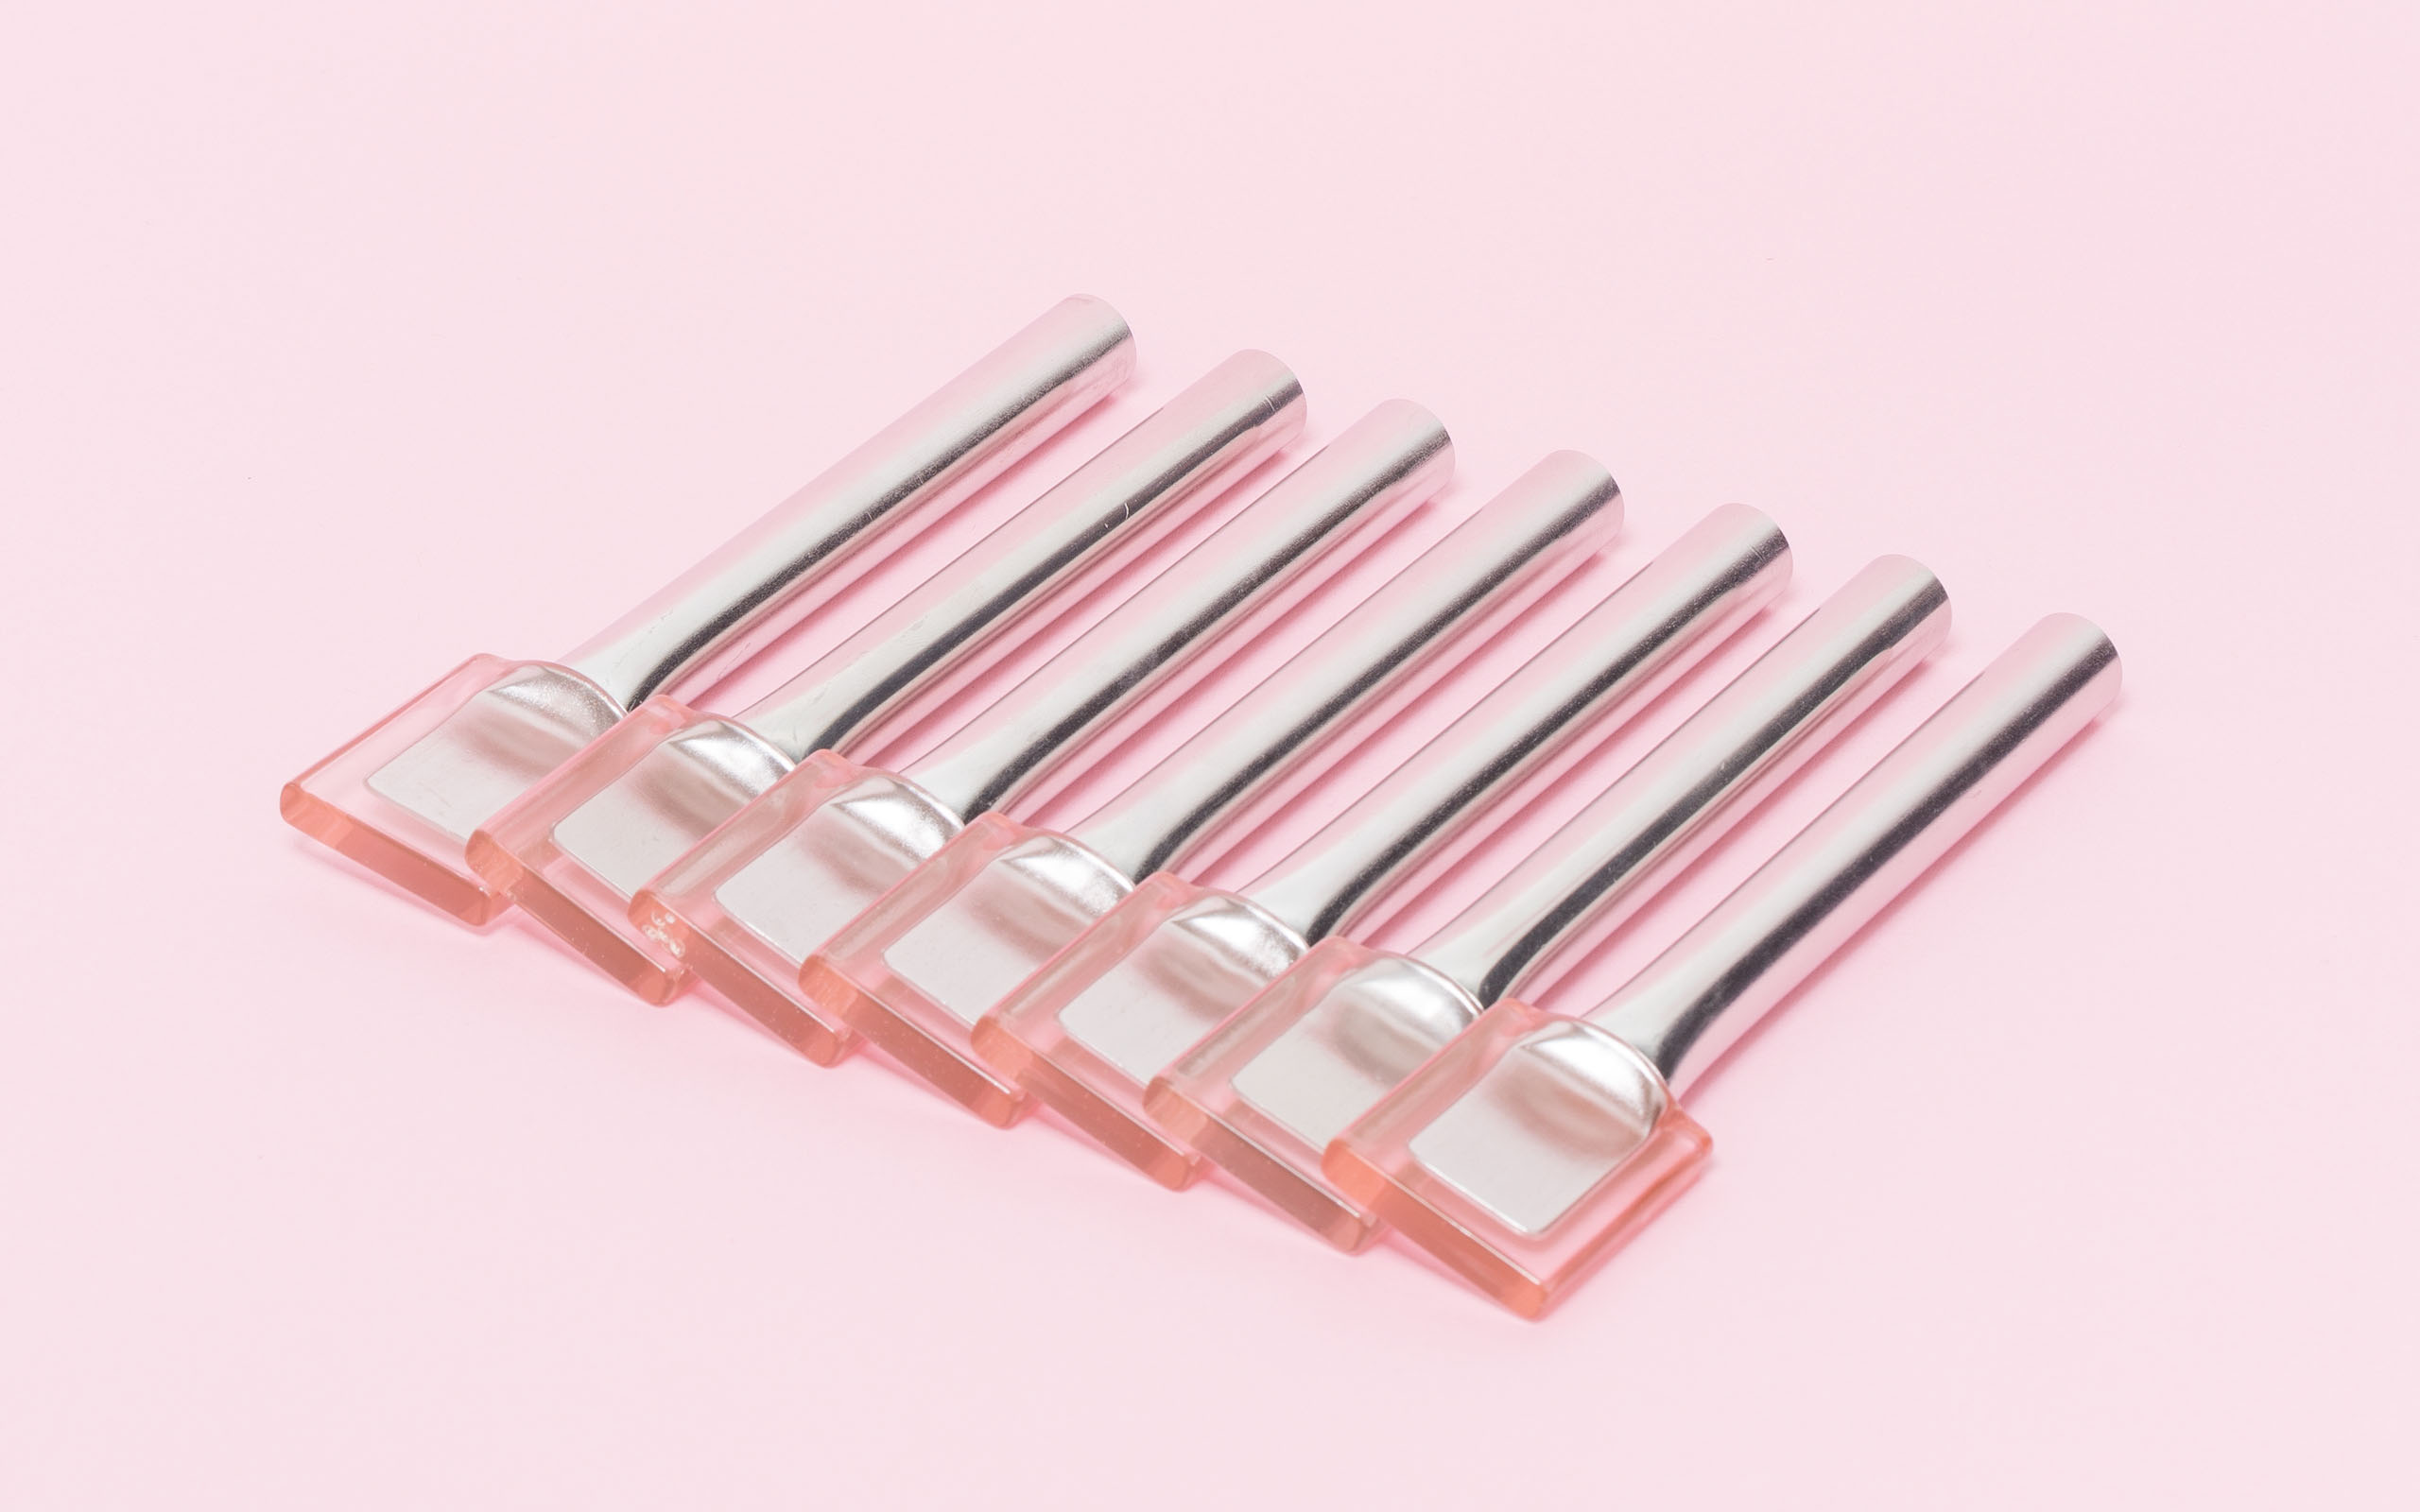 A row of Brb lollies with stainless steel grip.